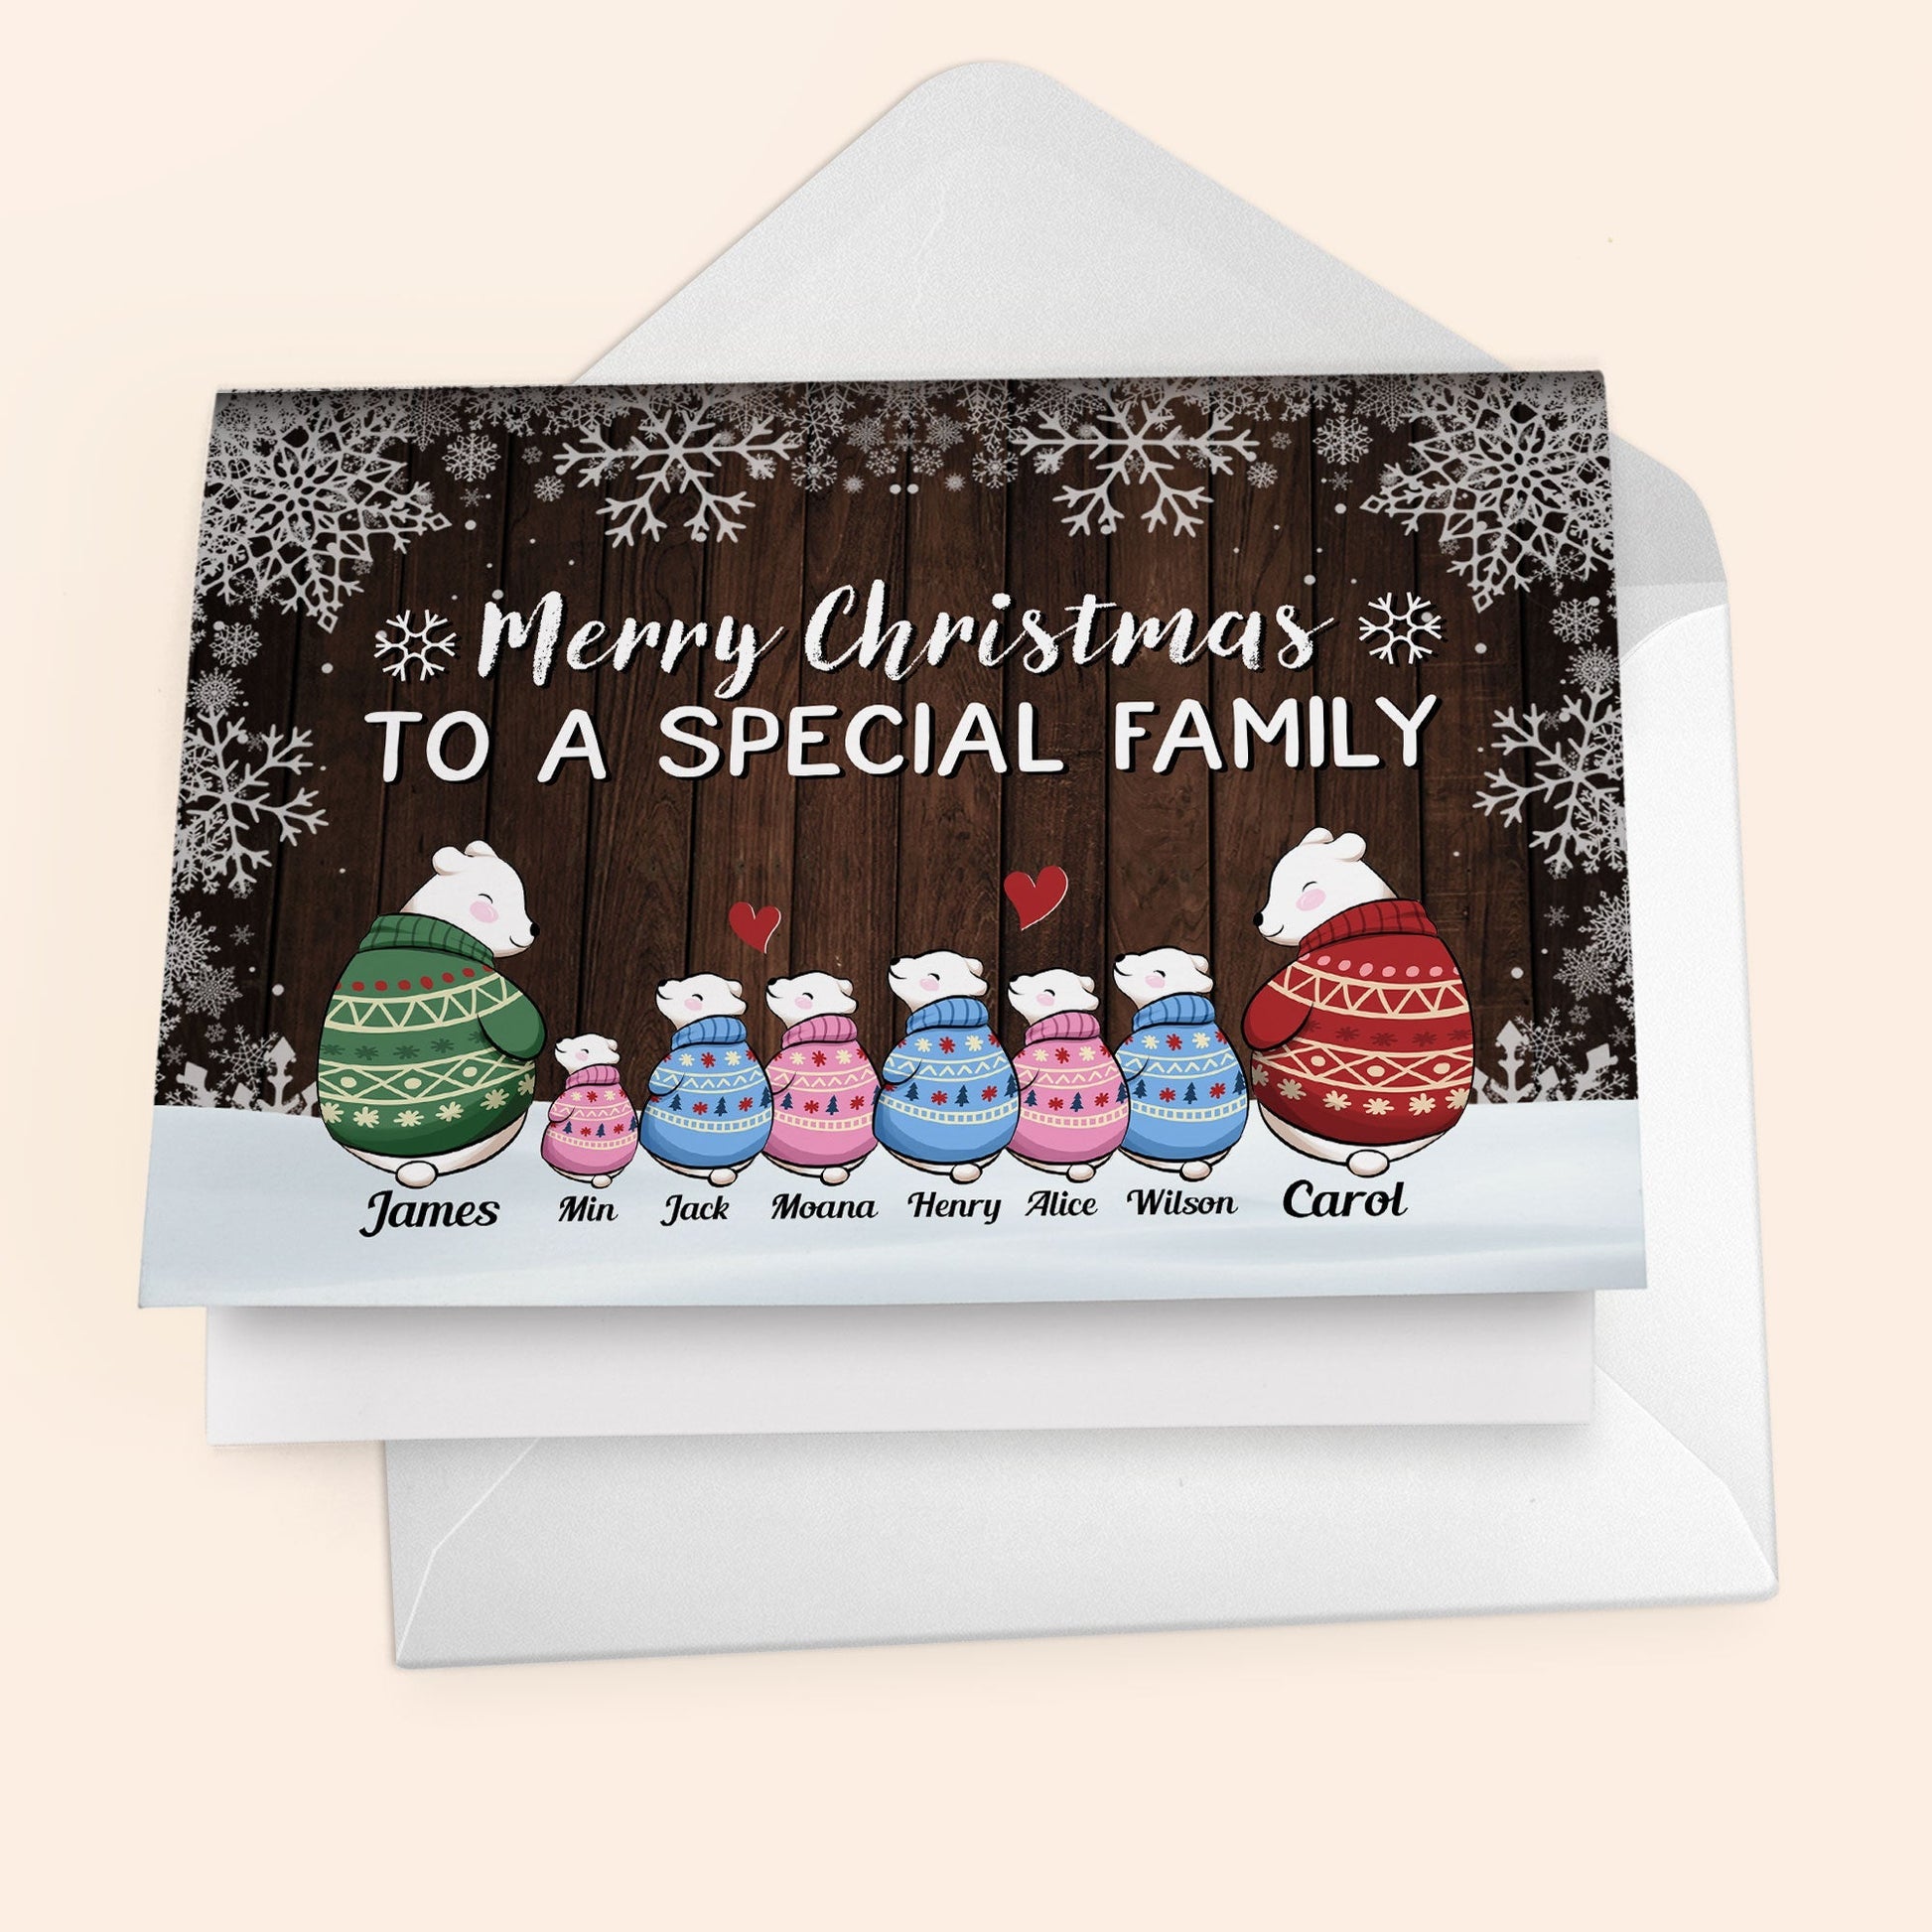 Merry Christmas To A Special Family - Personalized Folded Card - Christmas Gift For Family Members